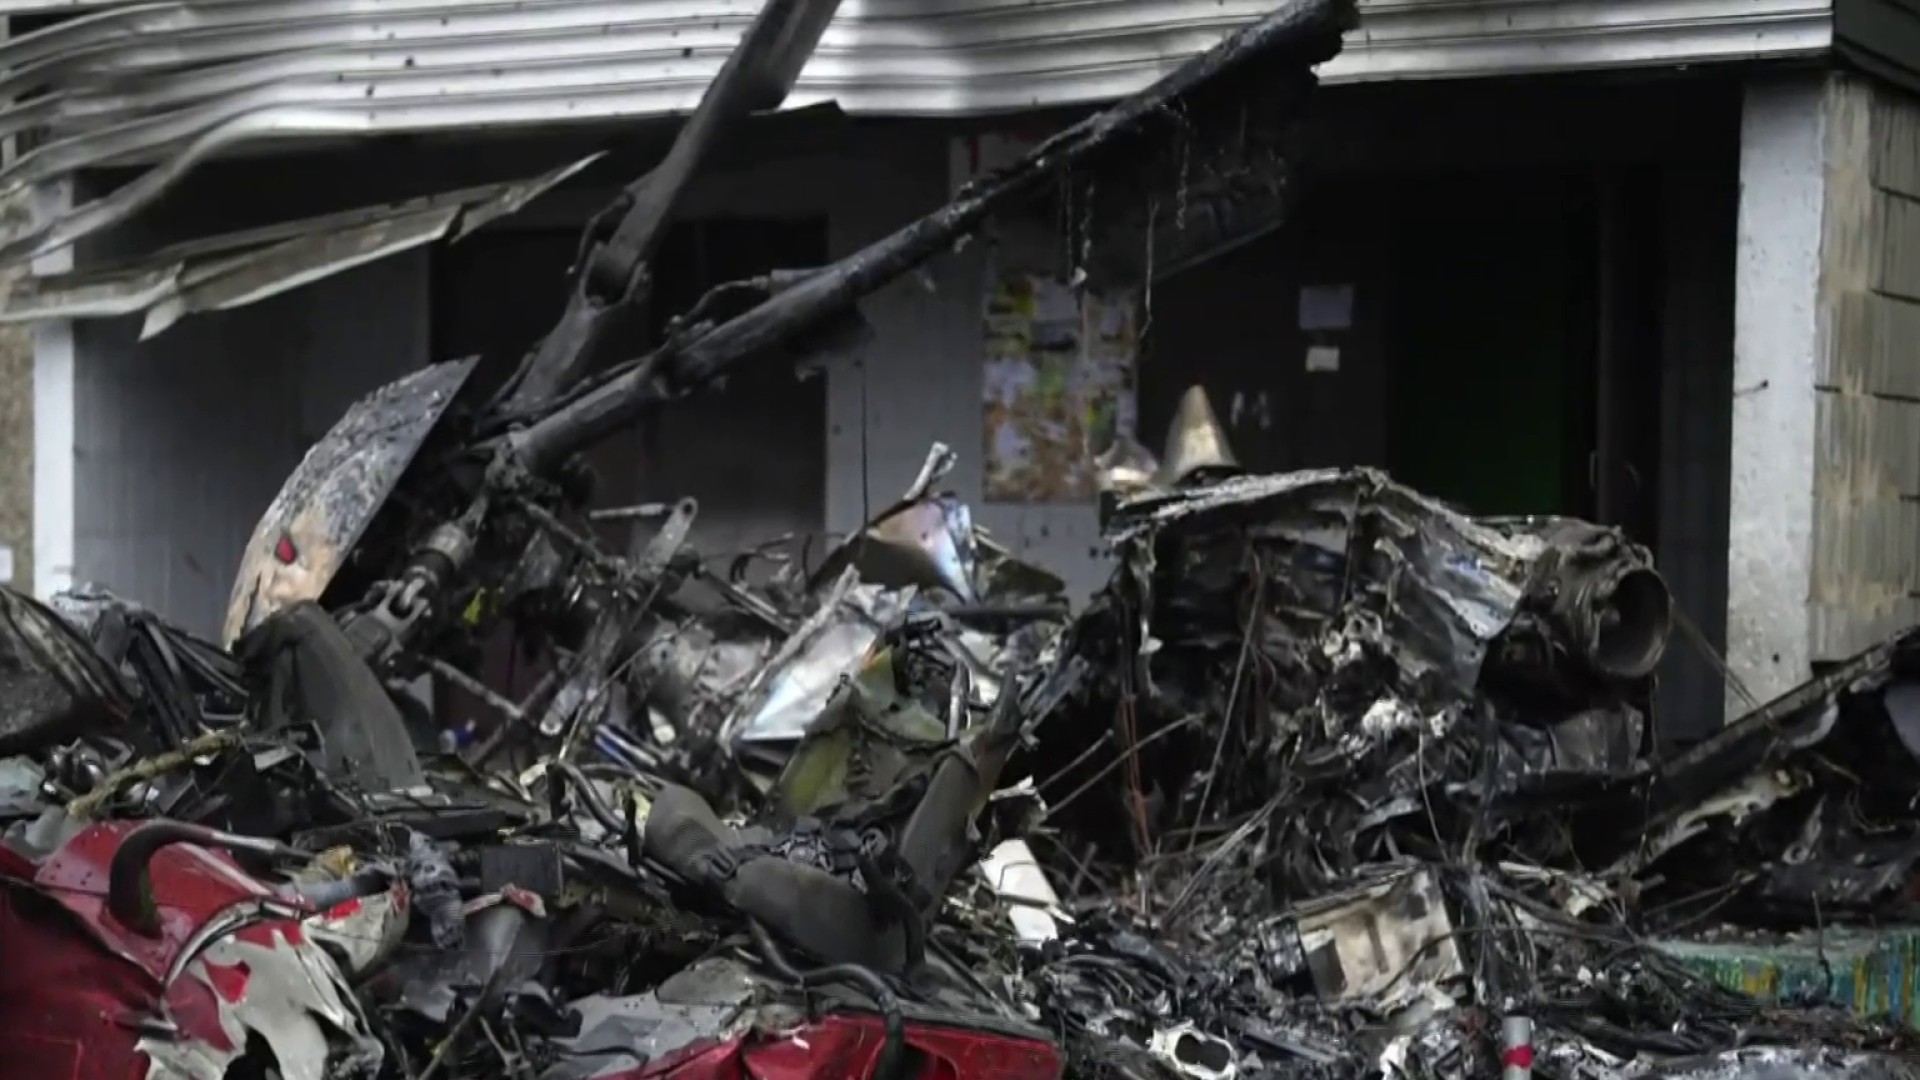 Interior Ministry Officials From Ukraine Were Killed In A Helicopter Crash